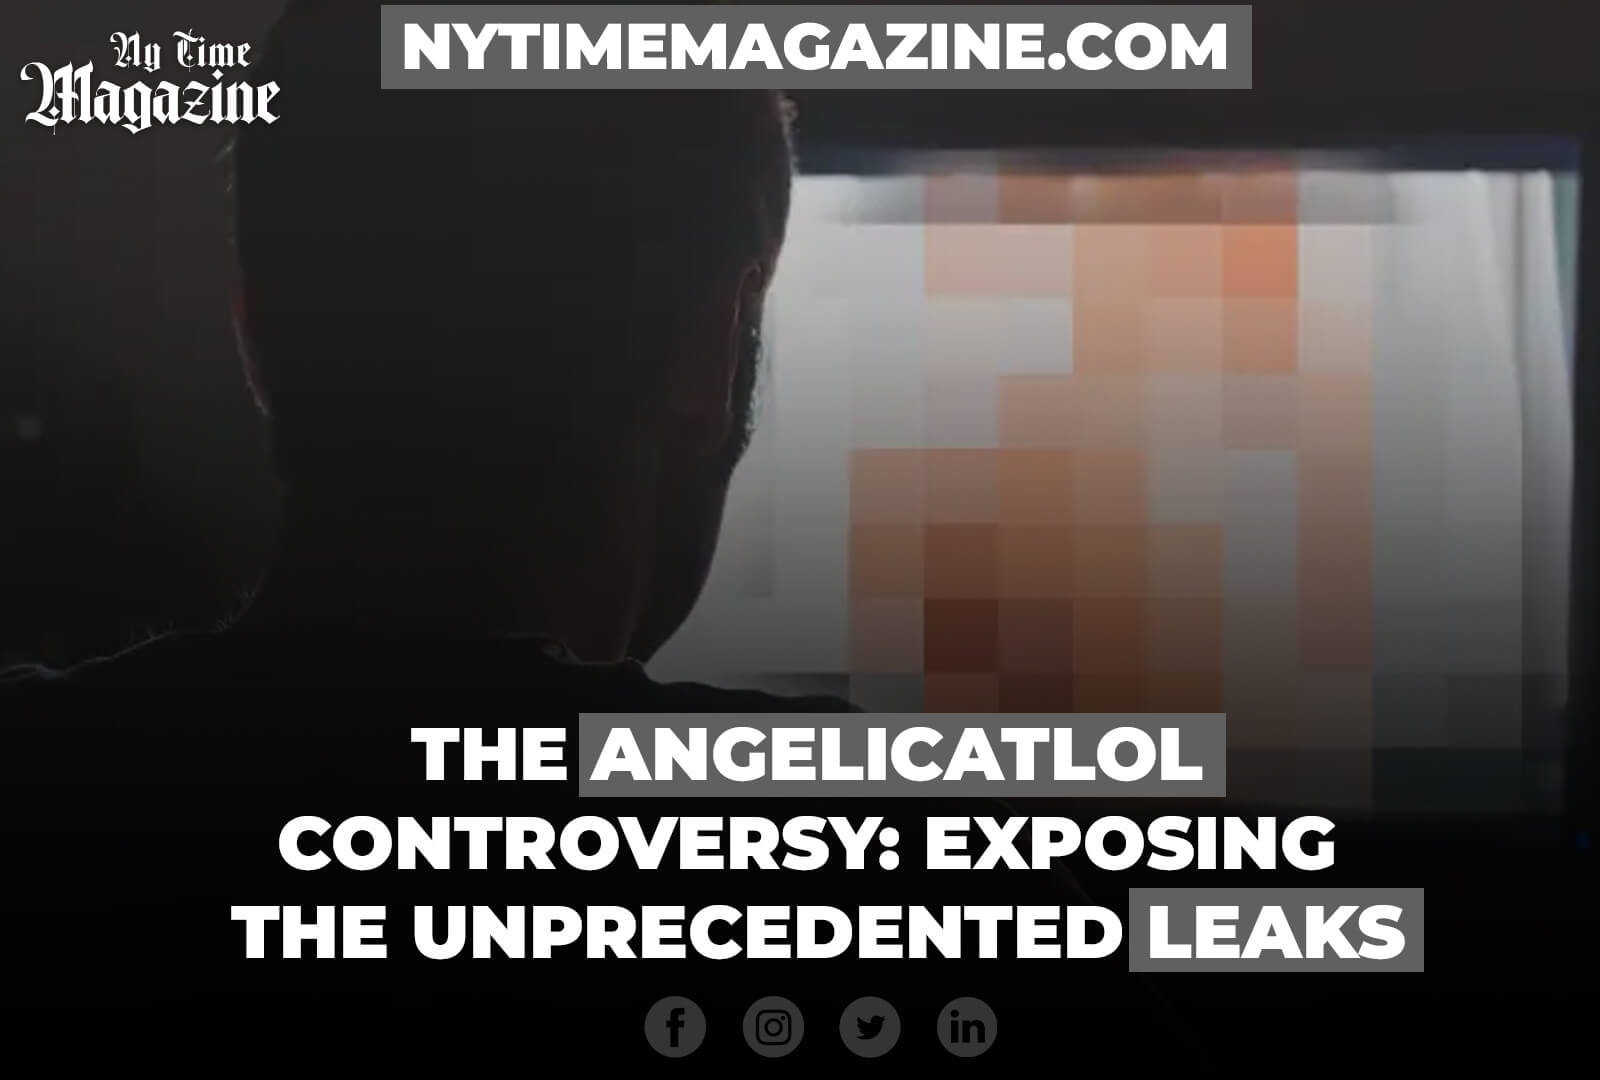 THE ANGELICATLOL CONTROVERSY: EXPOSING THE UNPRECEDENTED LEAKS